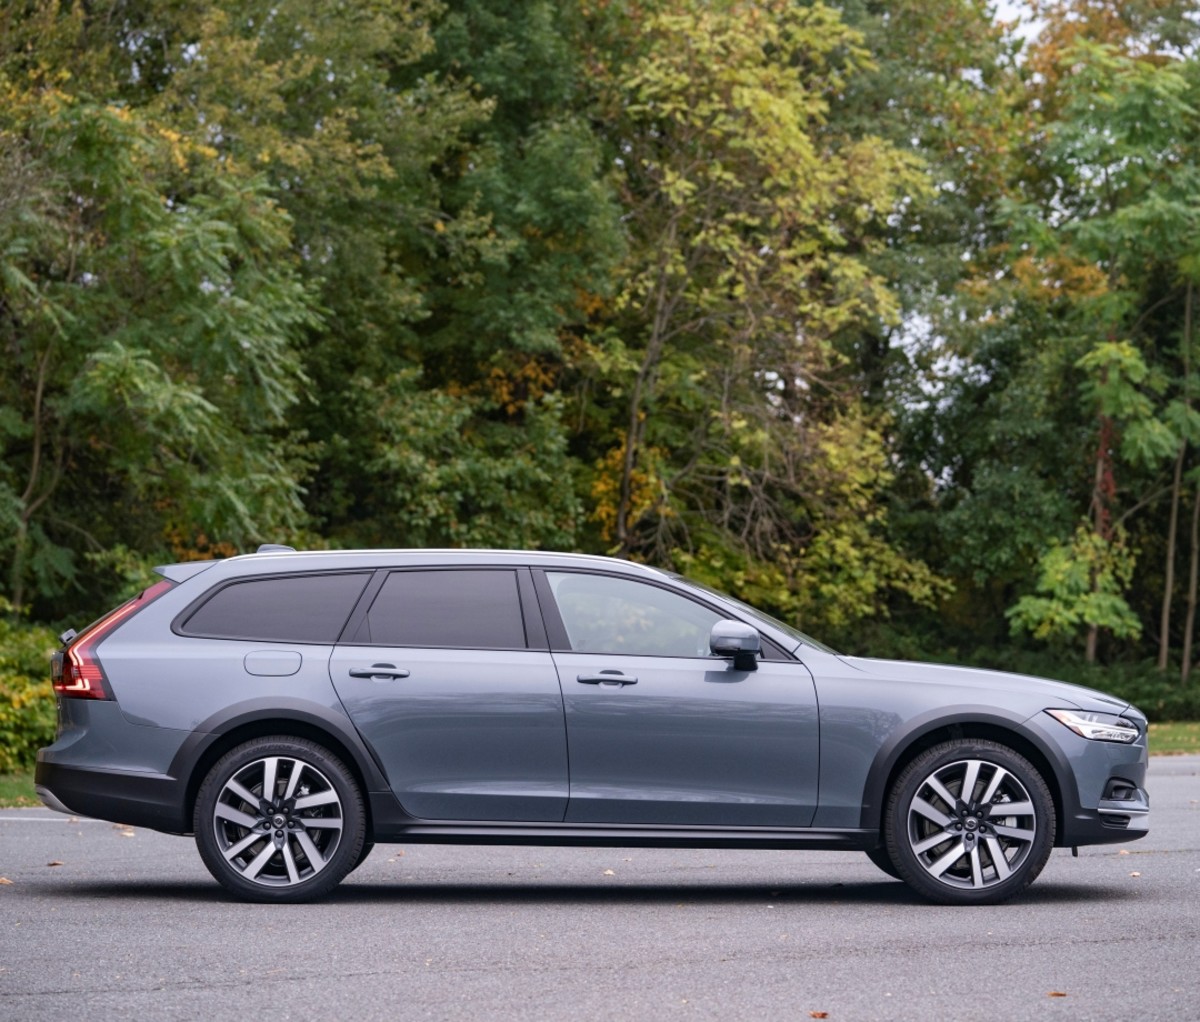 2021 Volvo V90 Cross Country parked in a parking lot with trees in the background